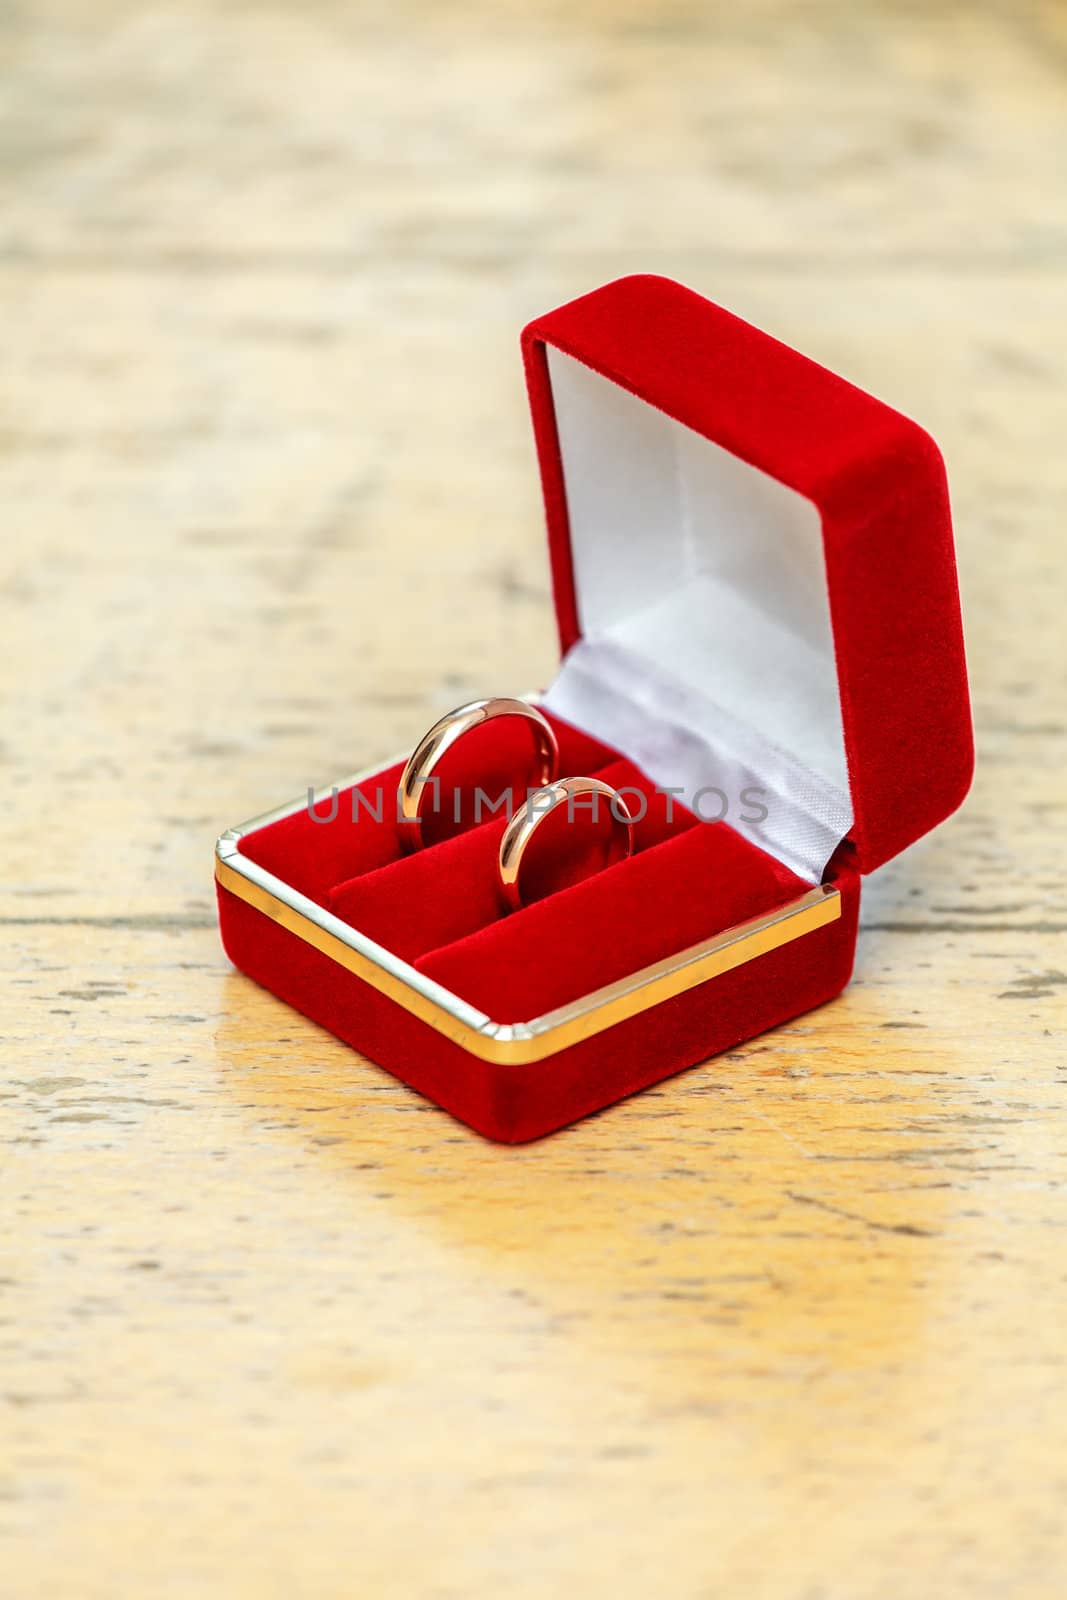 Two wedding rings in a box of red, lying on a wooden table